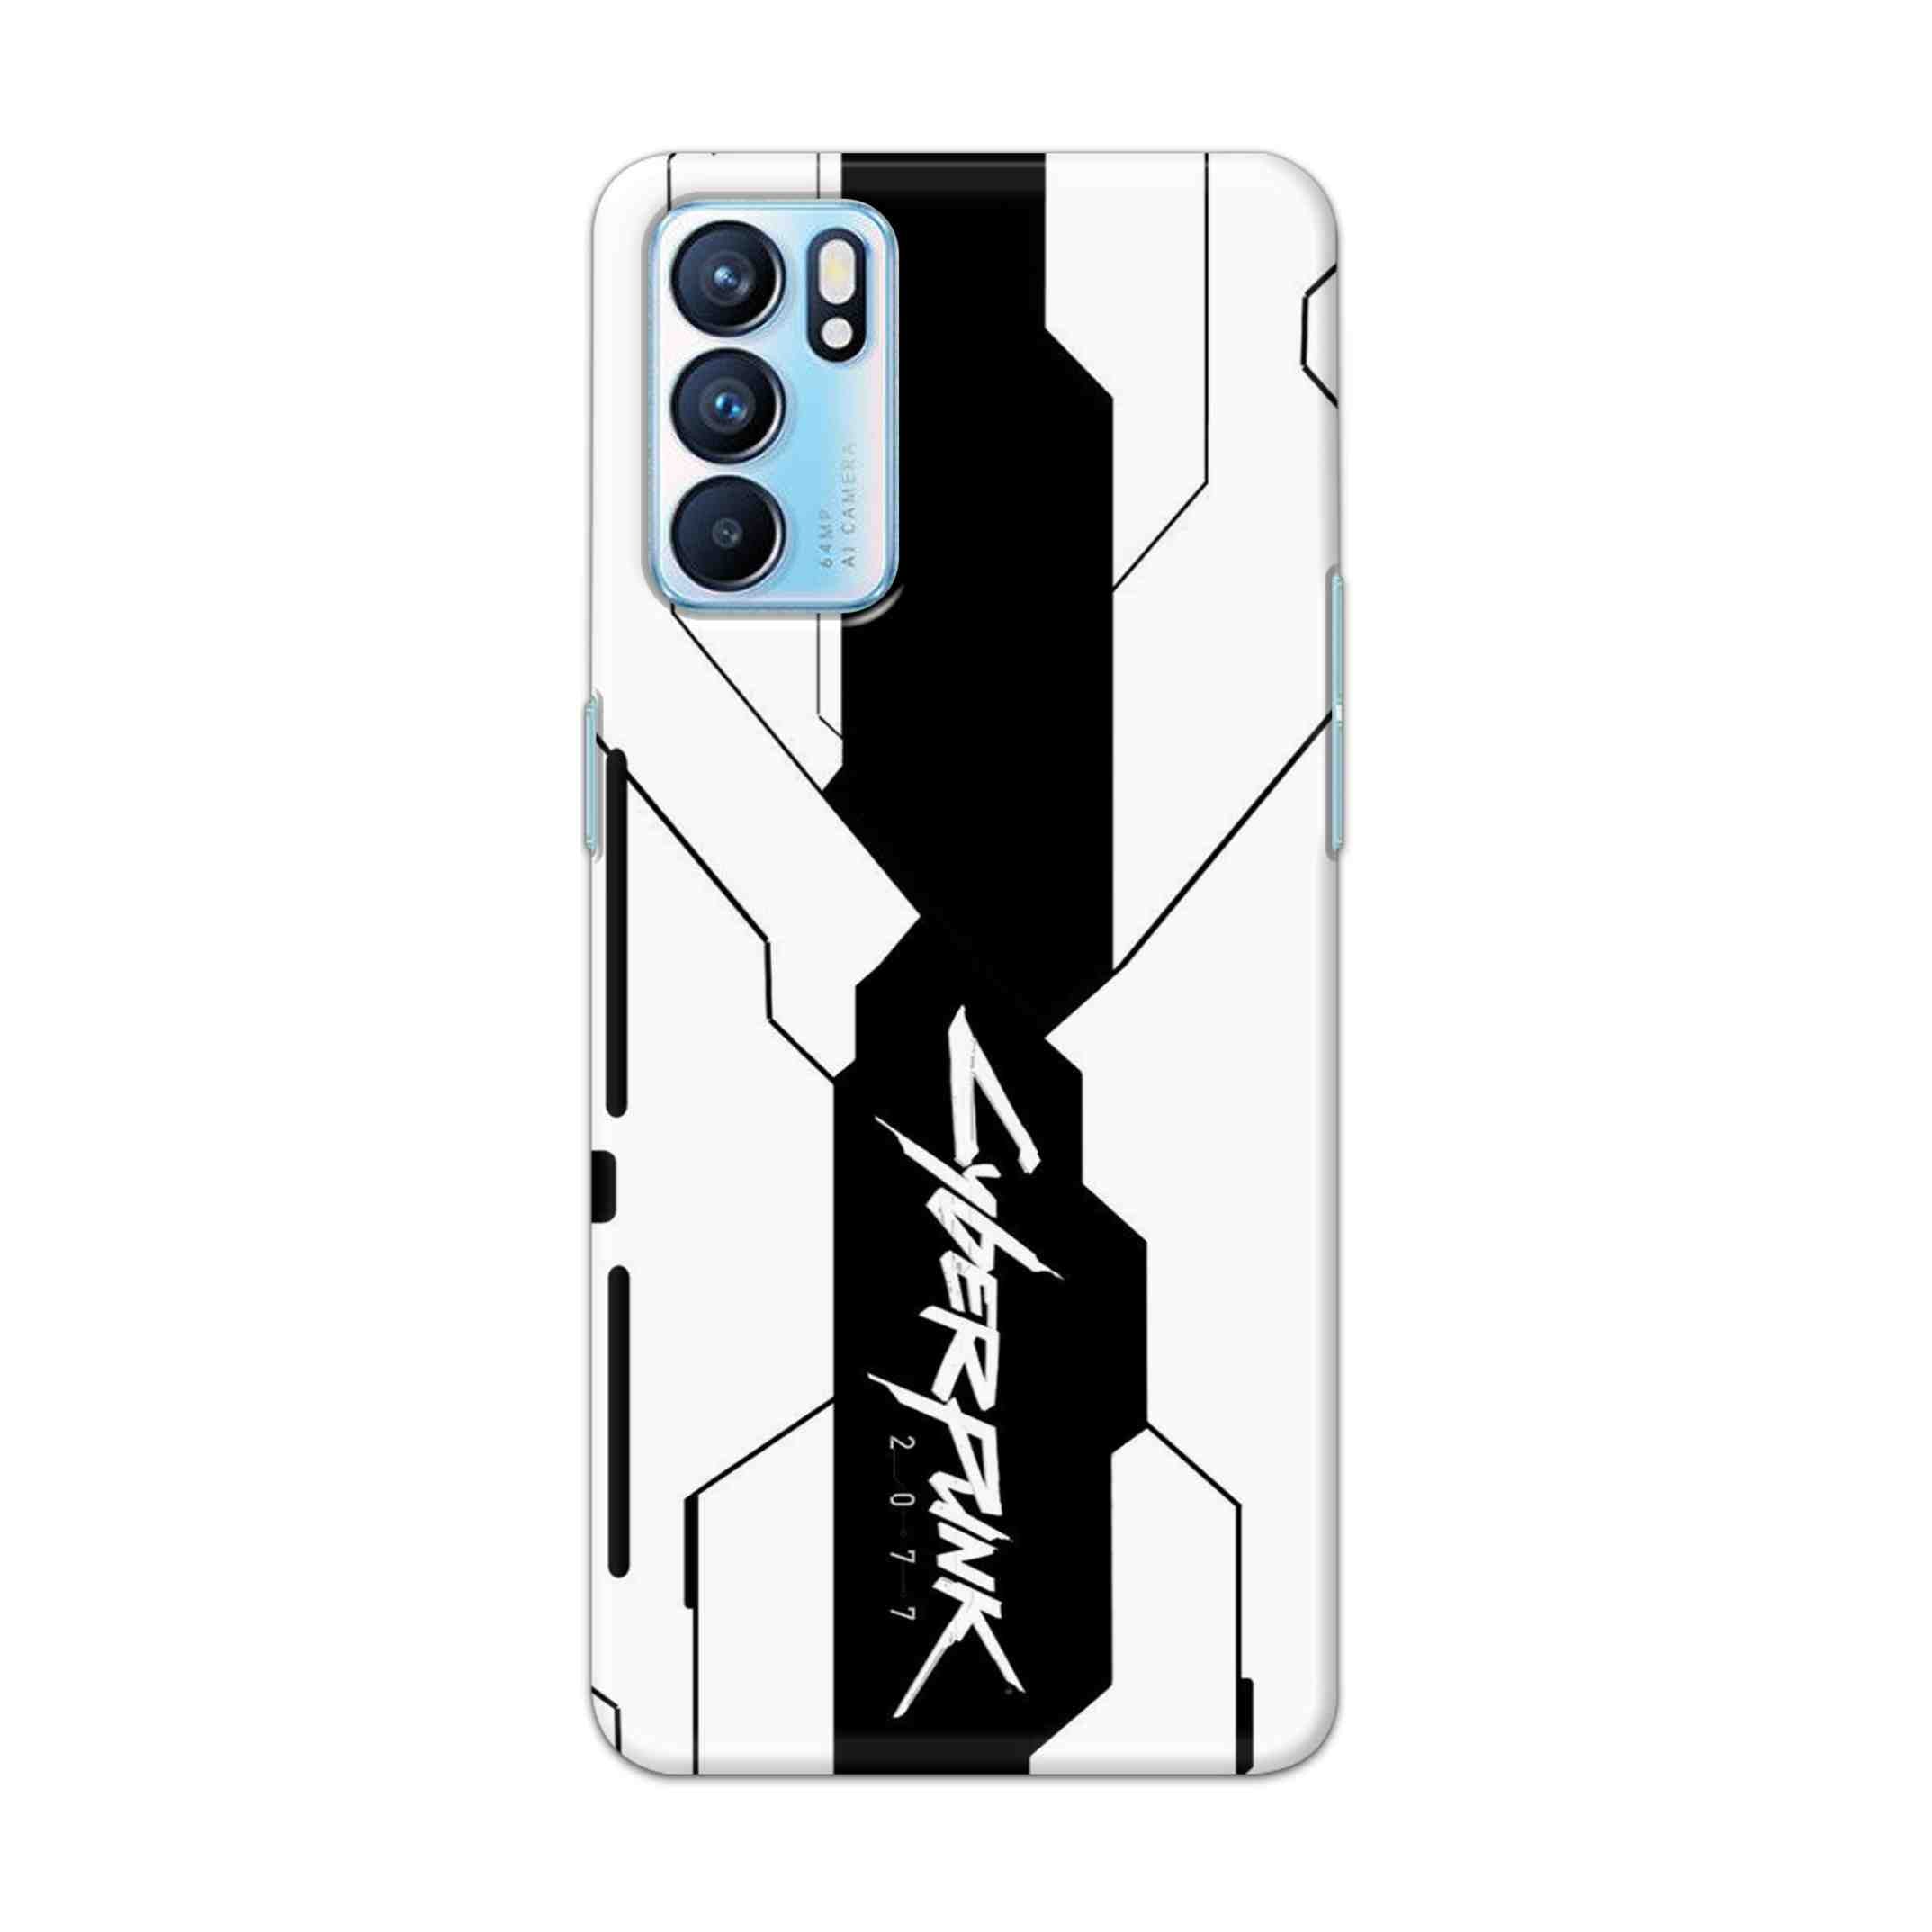 Buy Cyberpunk 2077 Hard Back Mobile Phone Case Cover For OPPO RENO 6 Online